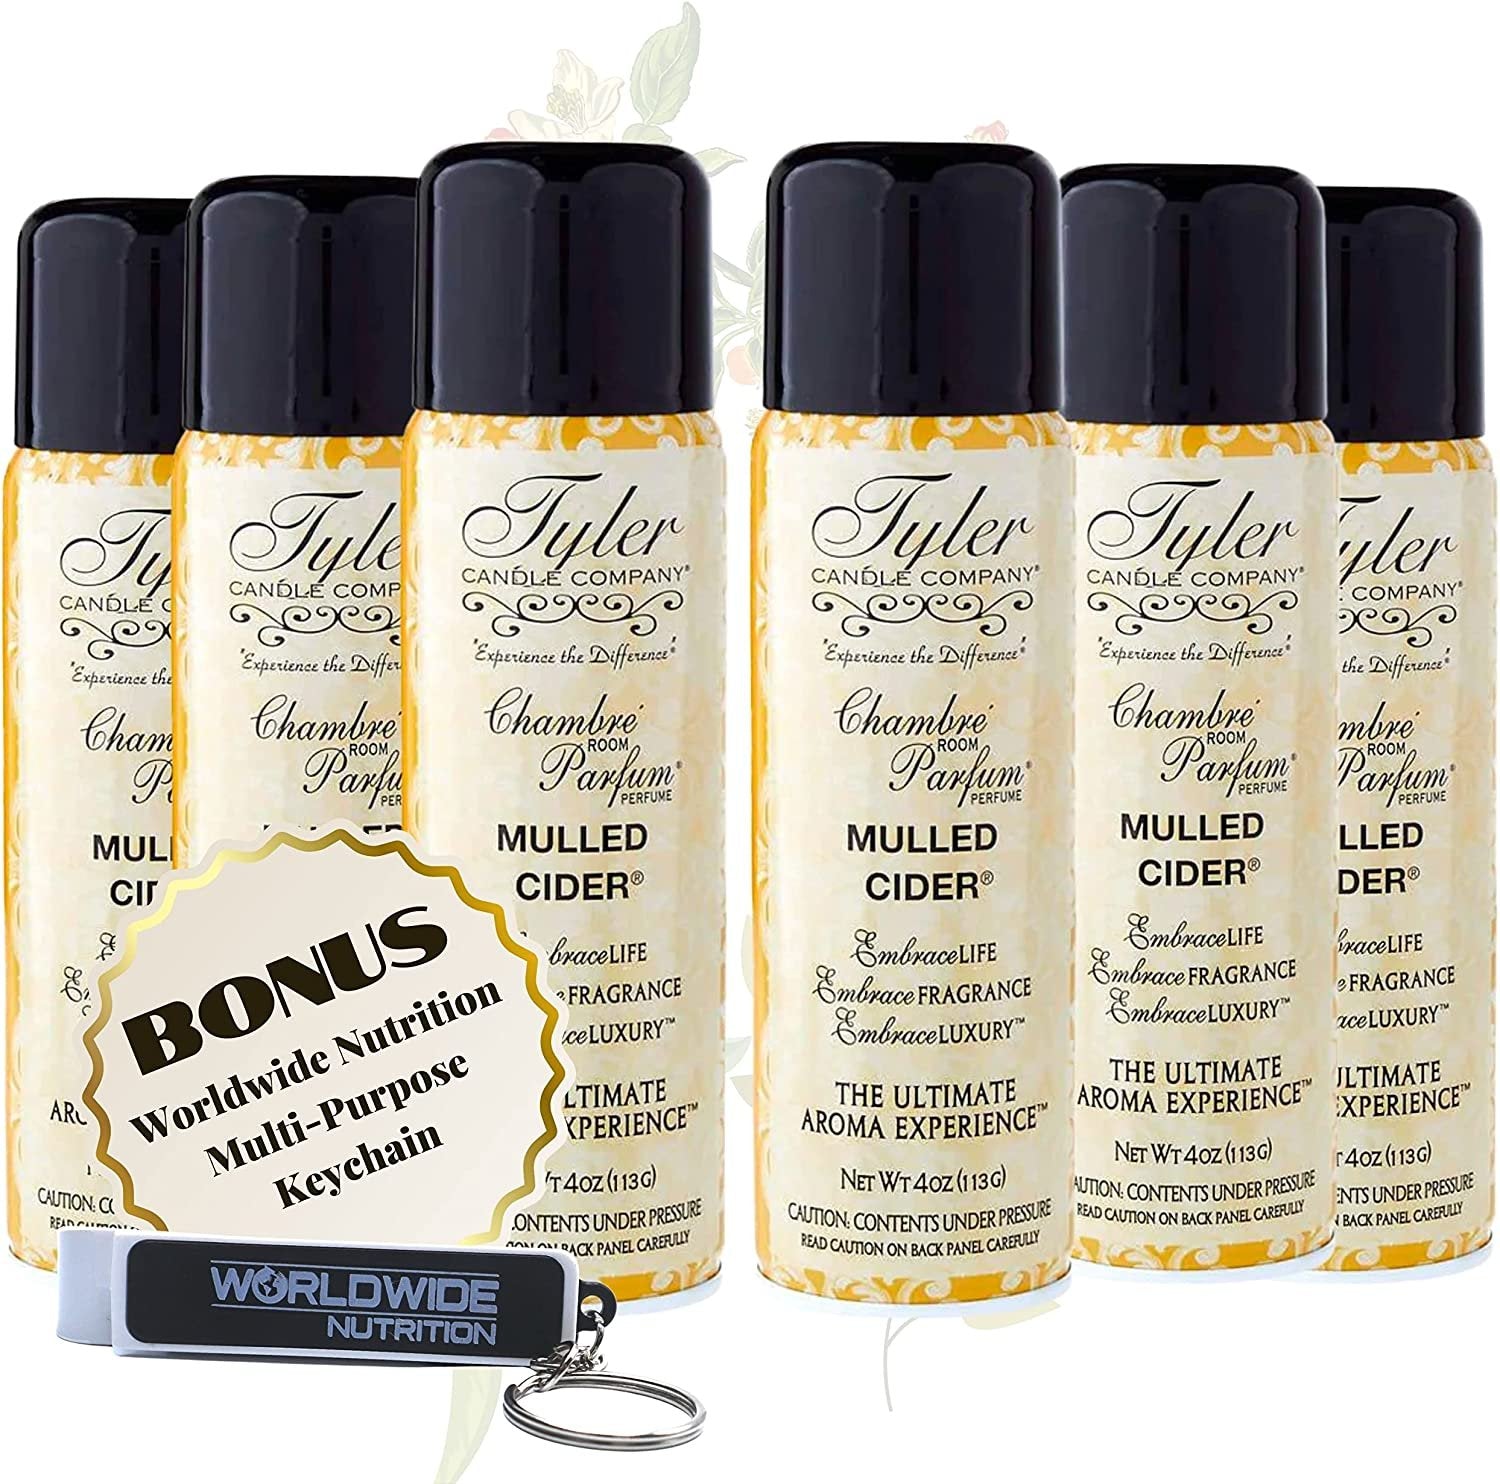 Tyler Candle Company Mulled Cider Signature Fragrance Chambre Parfum - Luxury Scent Air Freshener Spray - Ultimate Aromatic Experience - Home Essentials - 6 Pack of 4 Oz Container with Bonus Key Chain